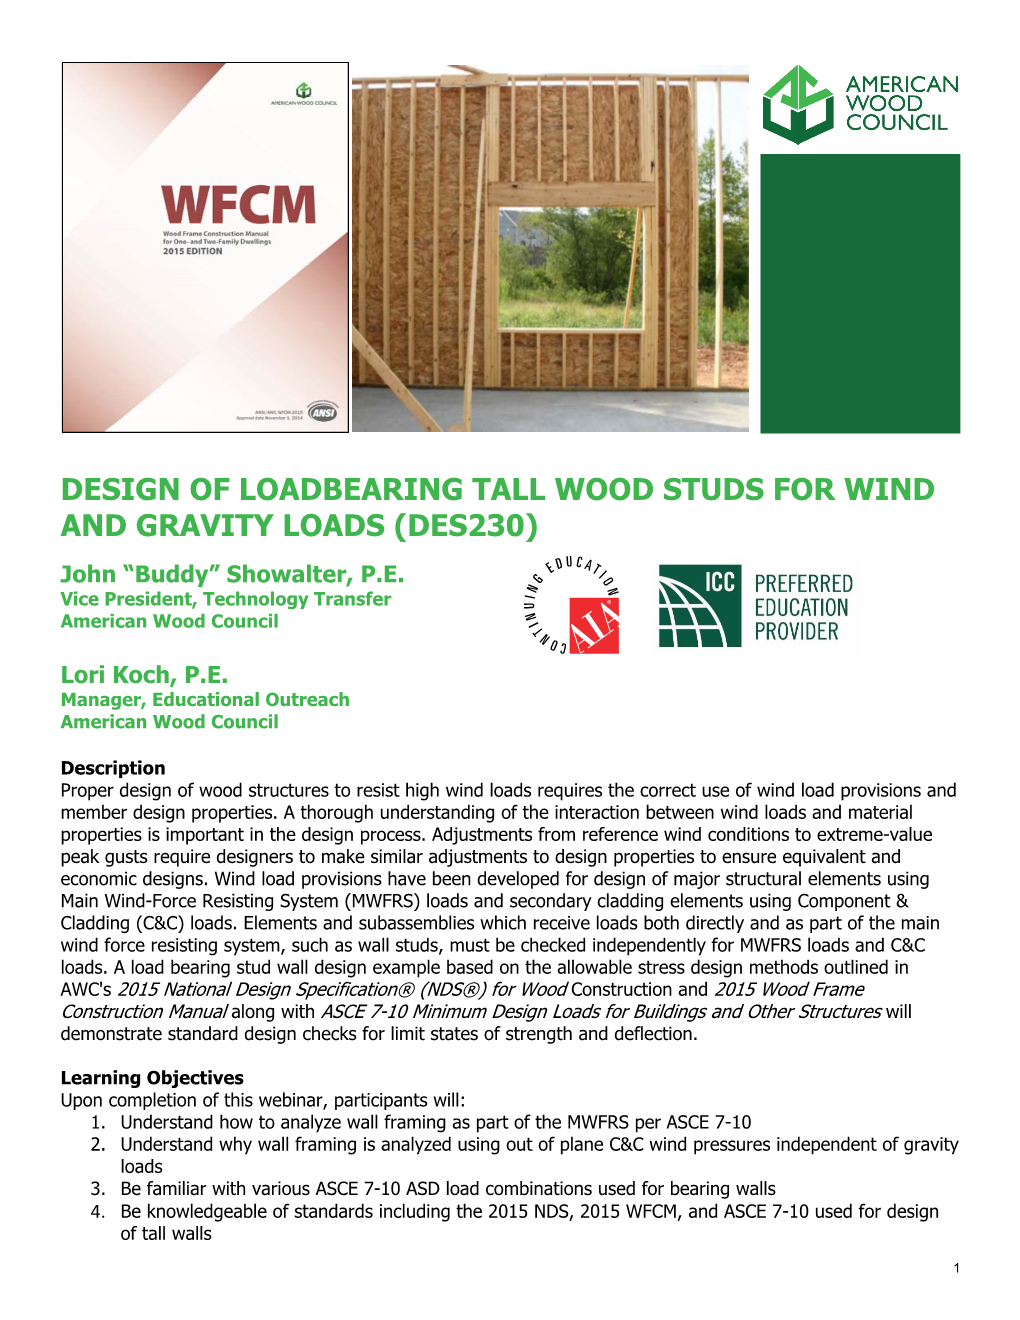 DESIGN of LOADBEARING TALL WOOD STUDS for WIND and GRAVITY LOADS (DES230) John “Buddy” Showalter, P.E